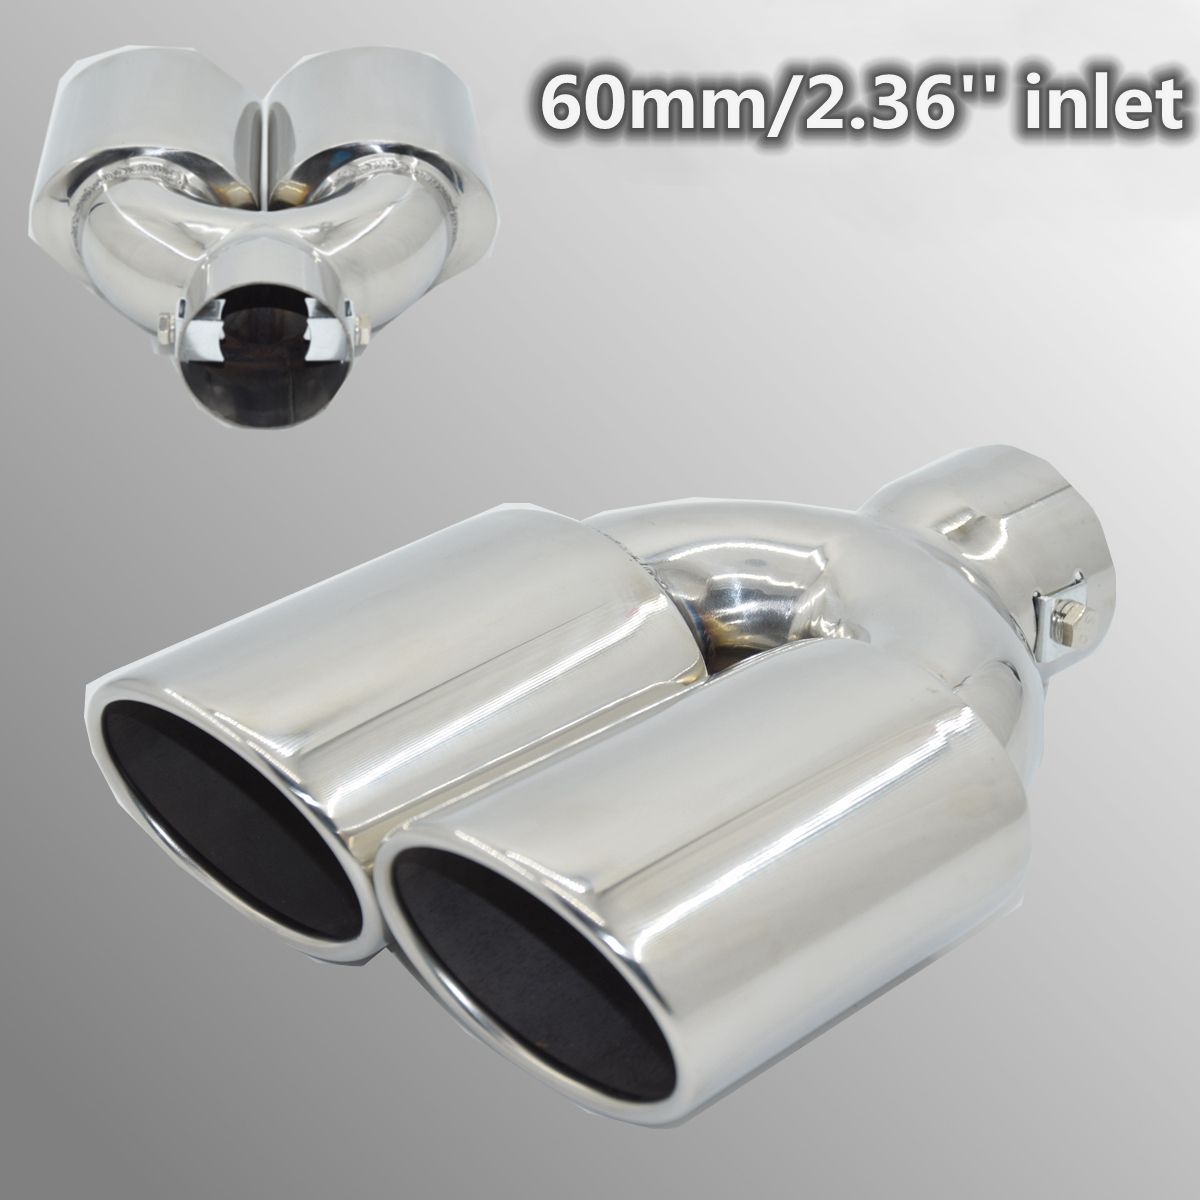 Universal-Chrome-Stainless-Steel-Car-Exhaust-Dual-Tailpipe-Tips-60mm-1192284